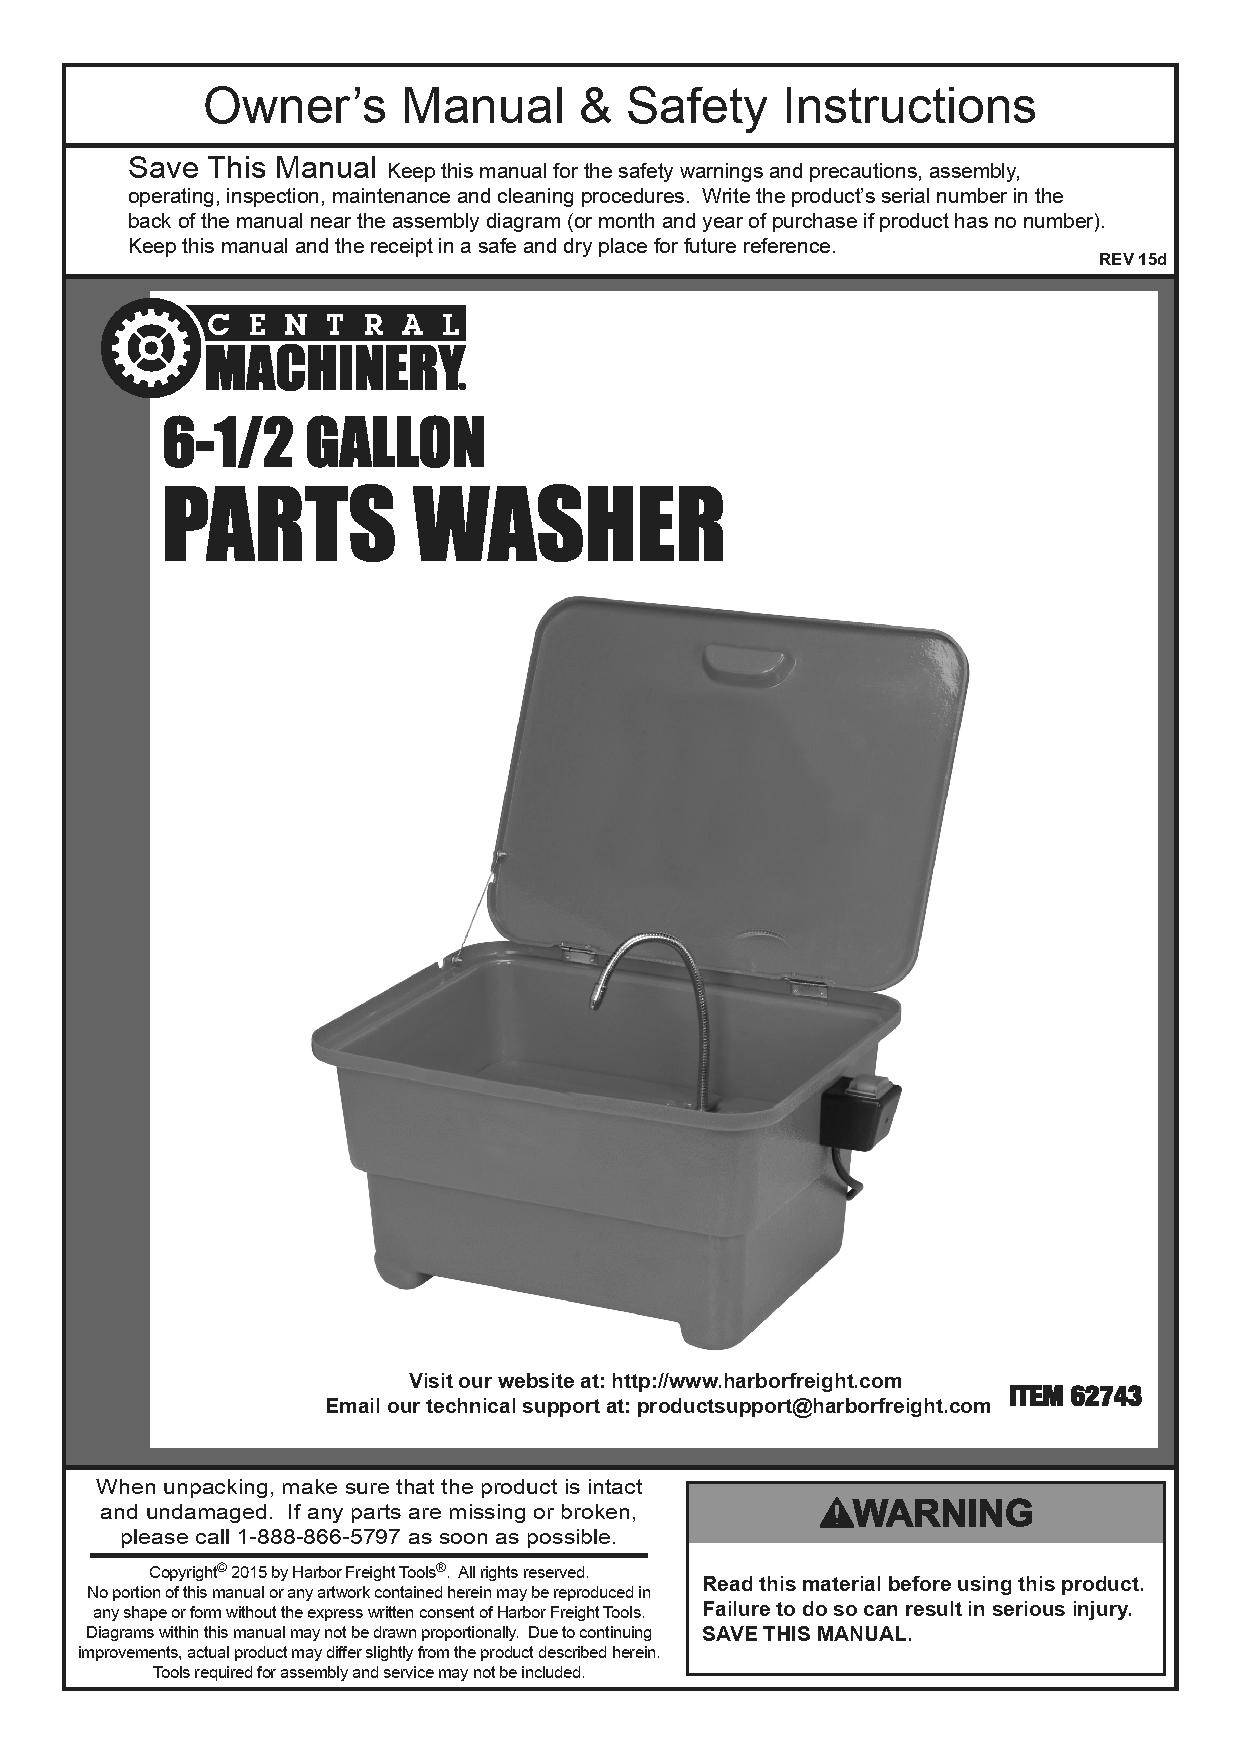 Central Machinery 6 gallon Parts Washer.pdf